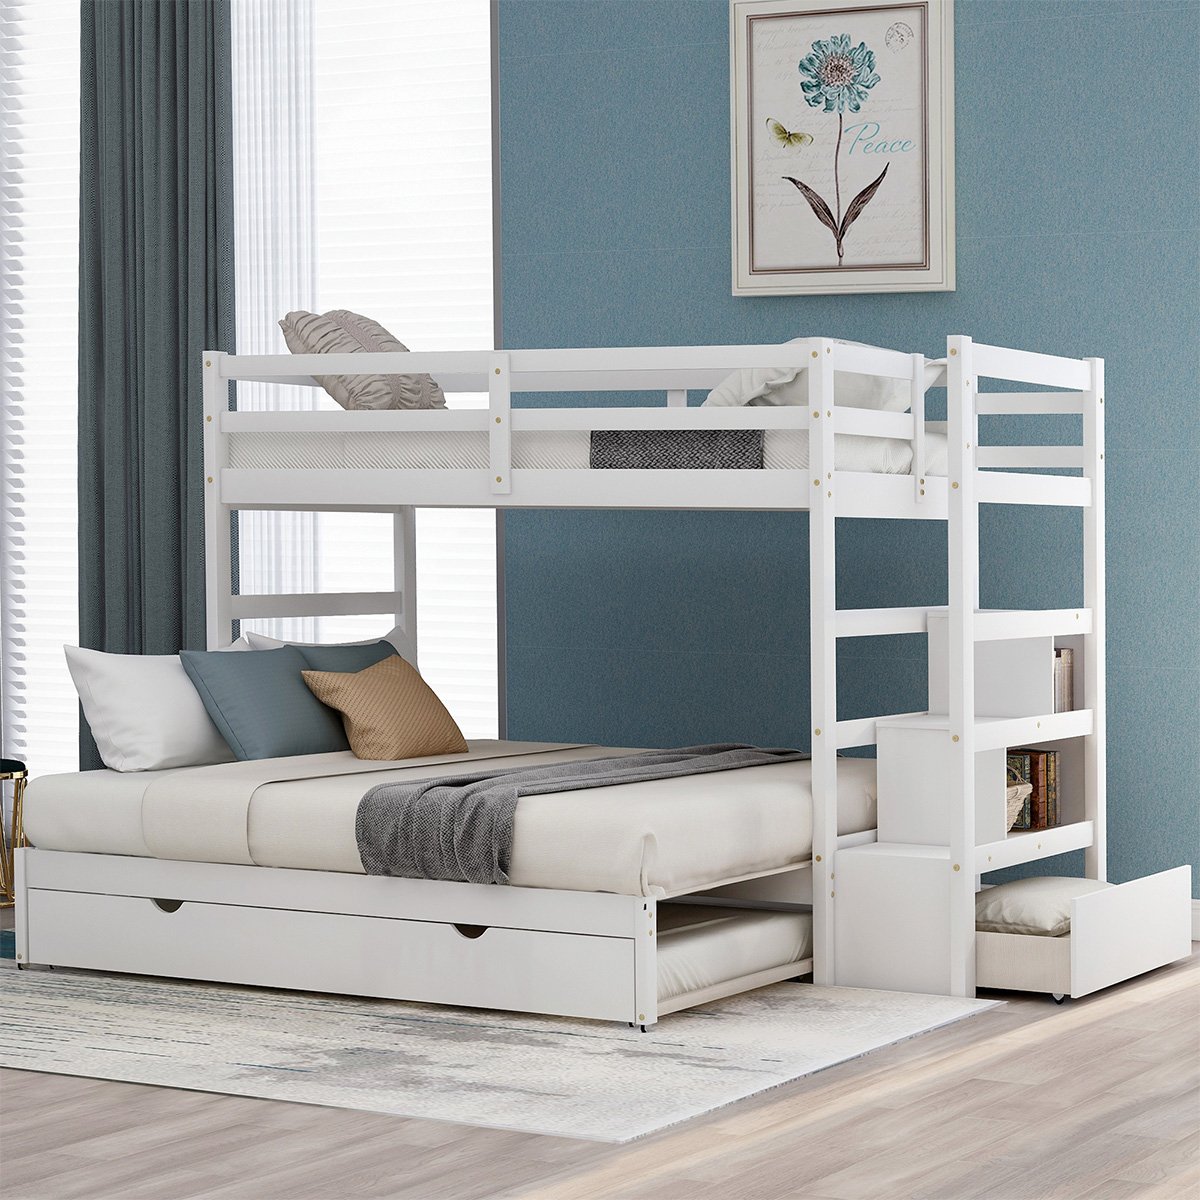 SENTERN Twin over Twin/King Bunk Bed with Twin